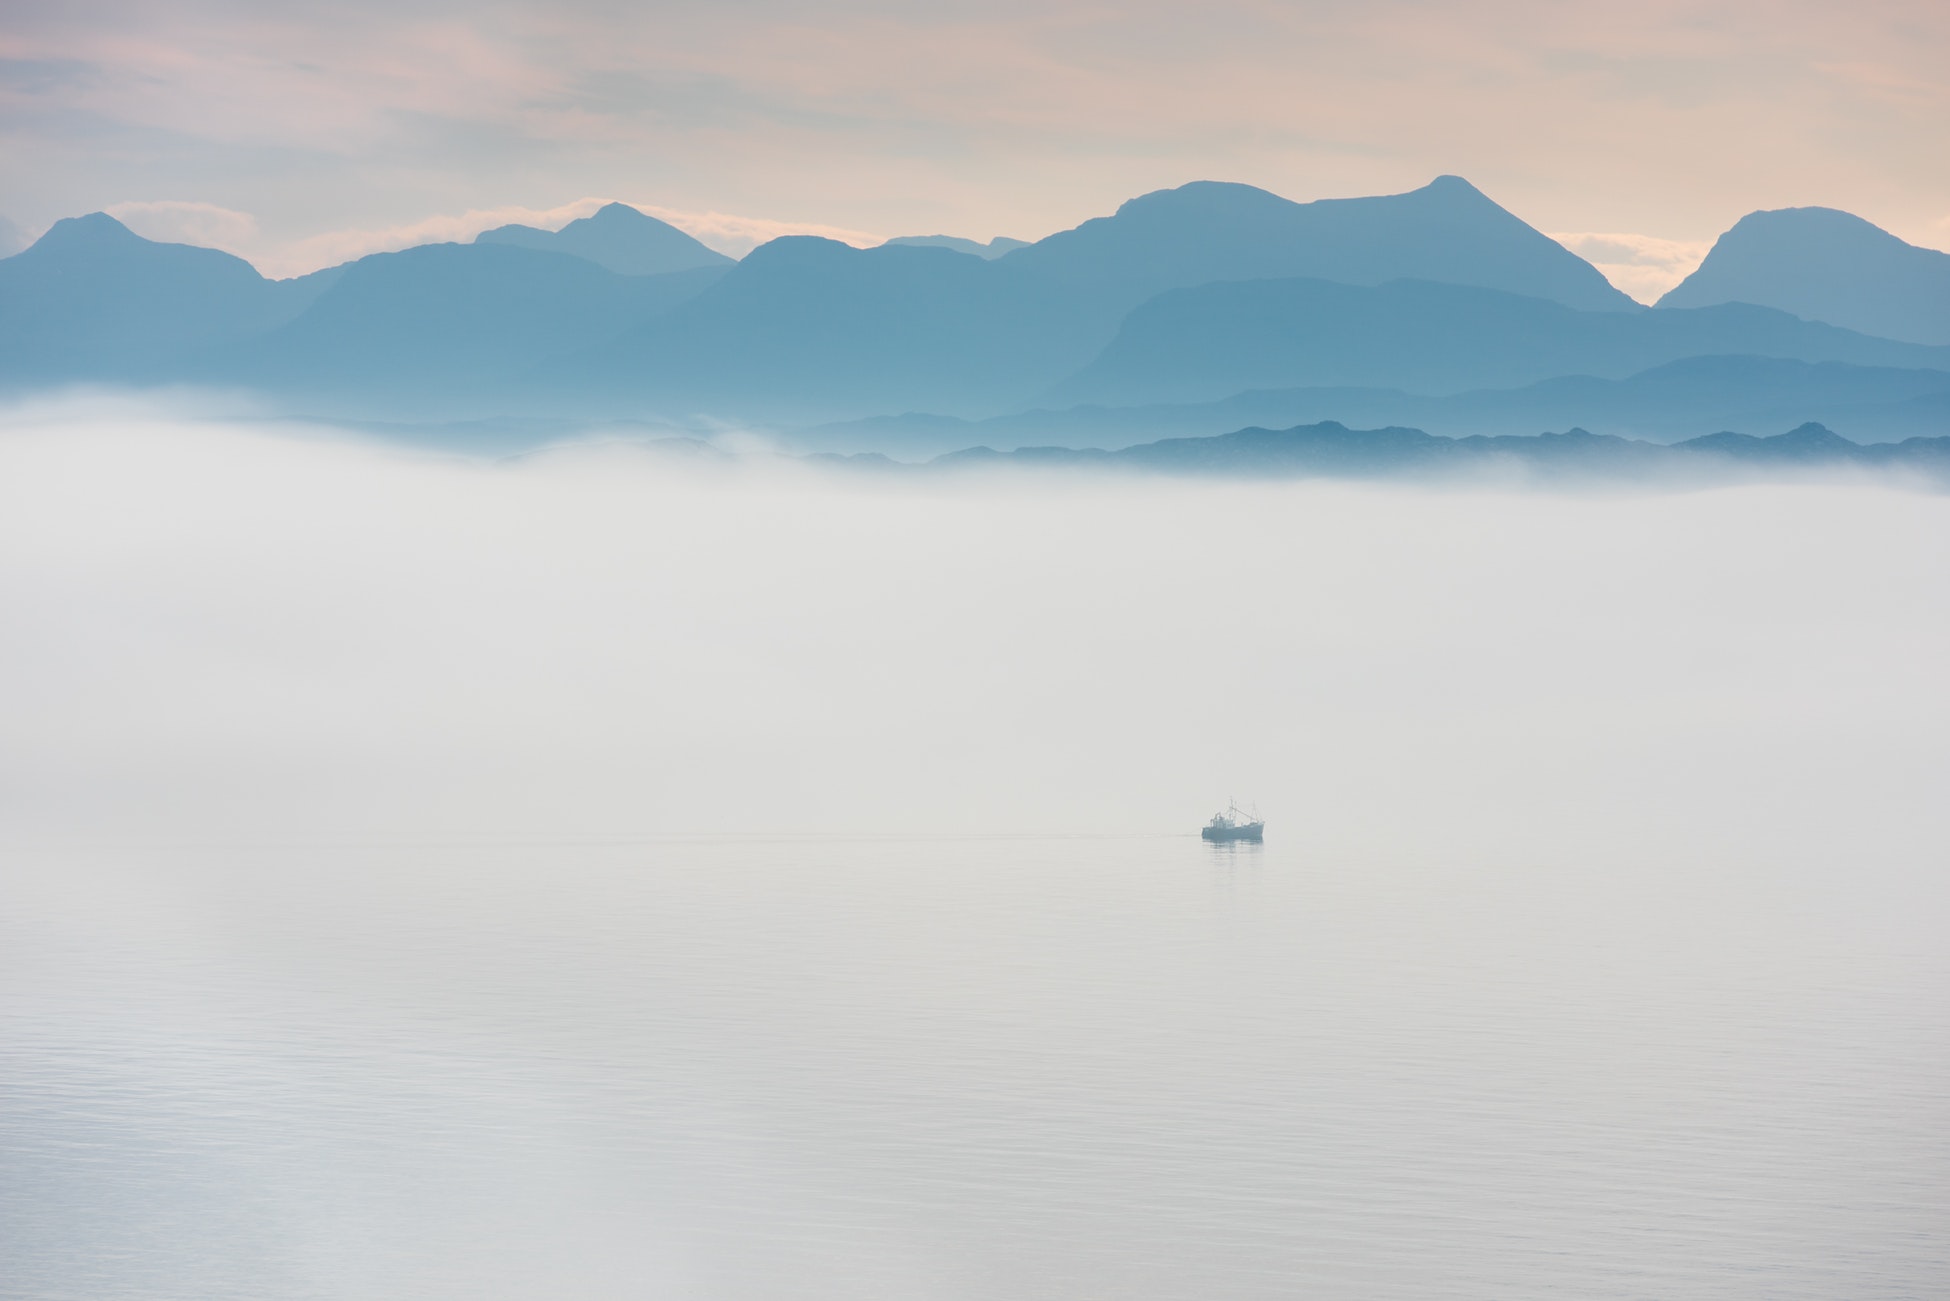 Small boat on large open water surrounded by mountains and fog.